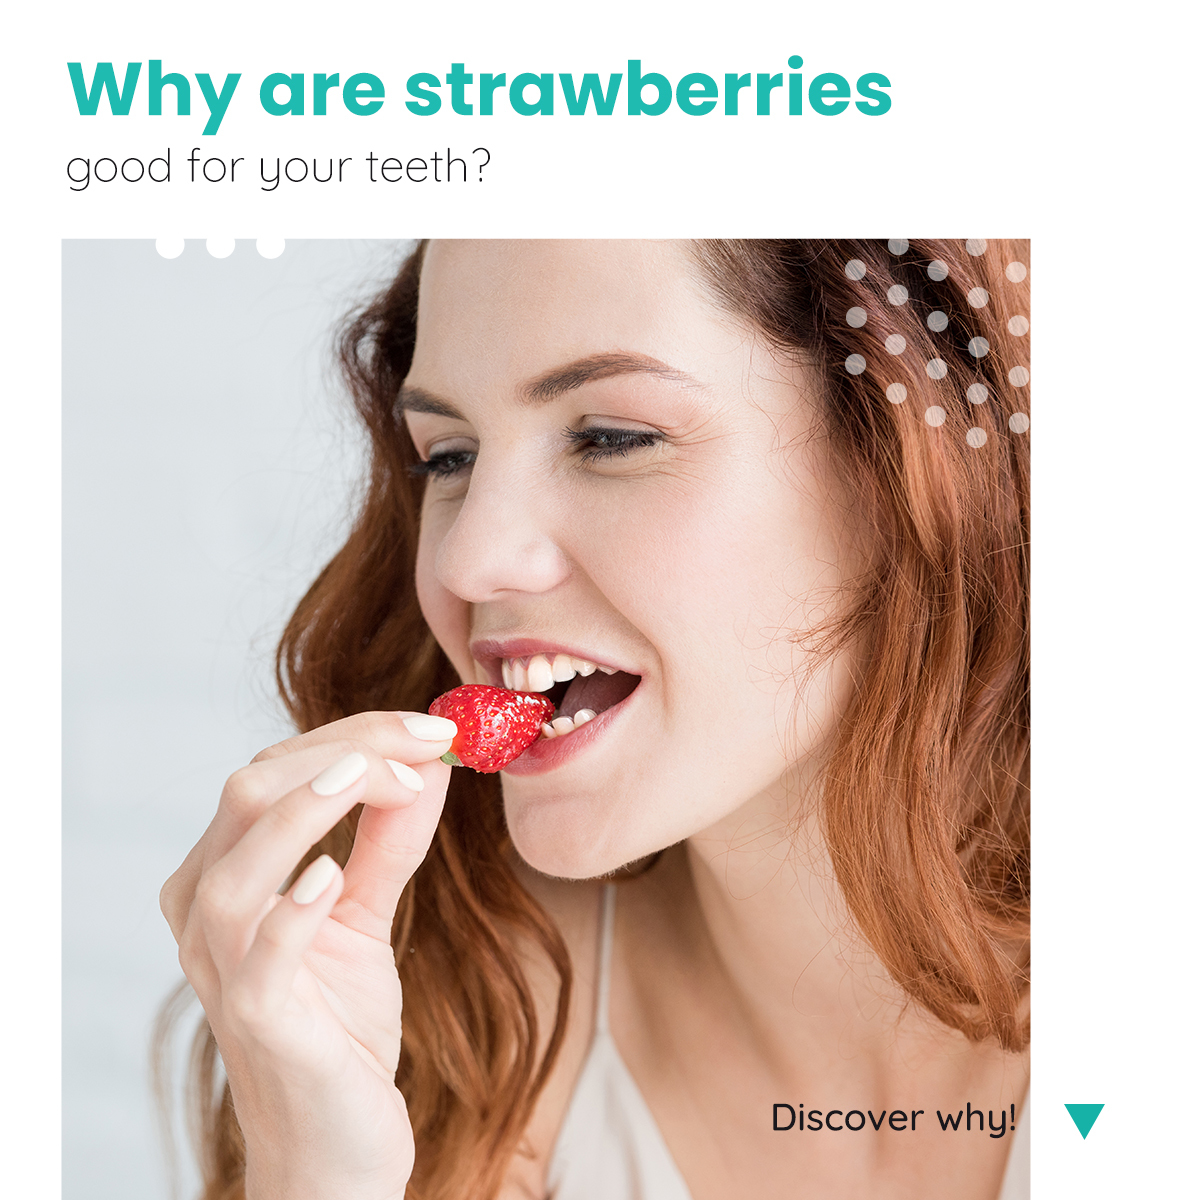 Why are strawberries good for your teeth?